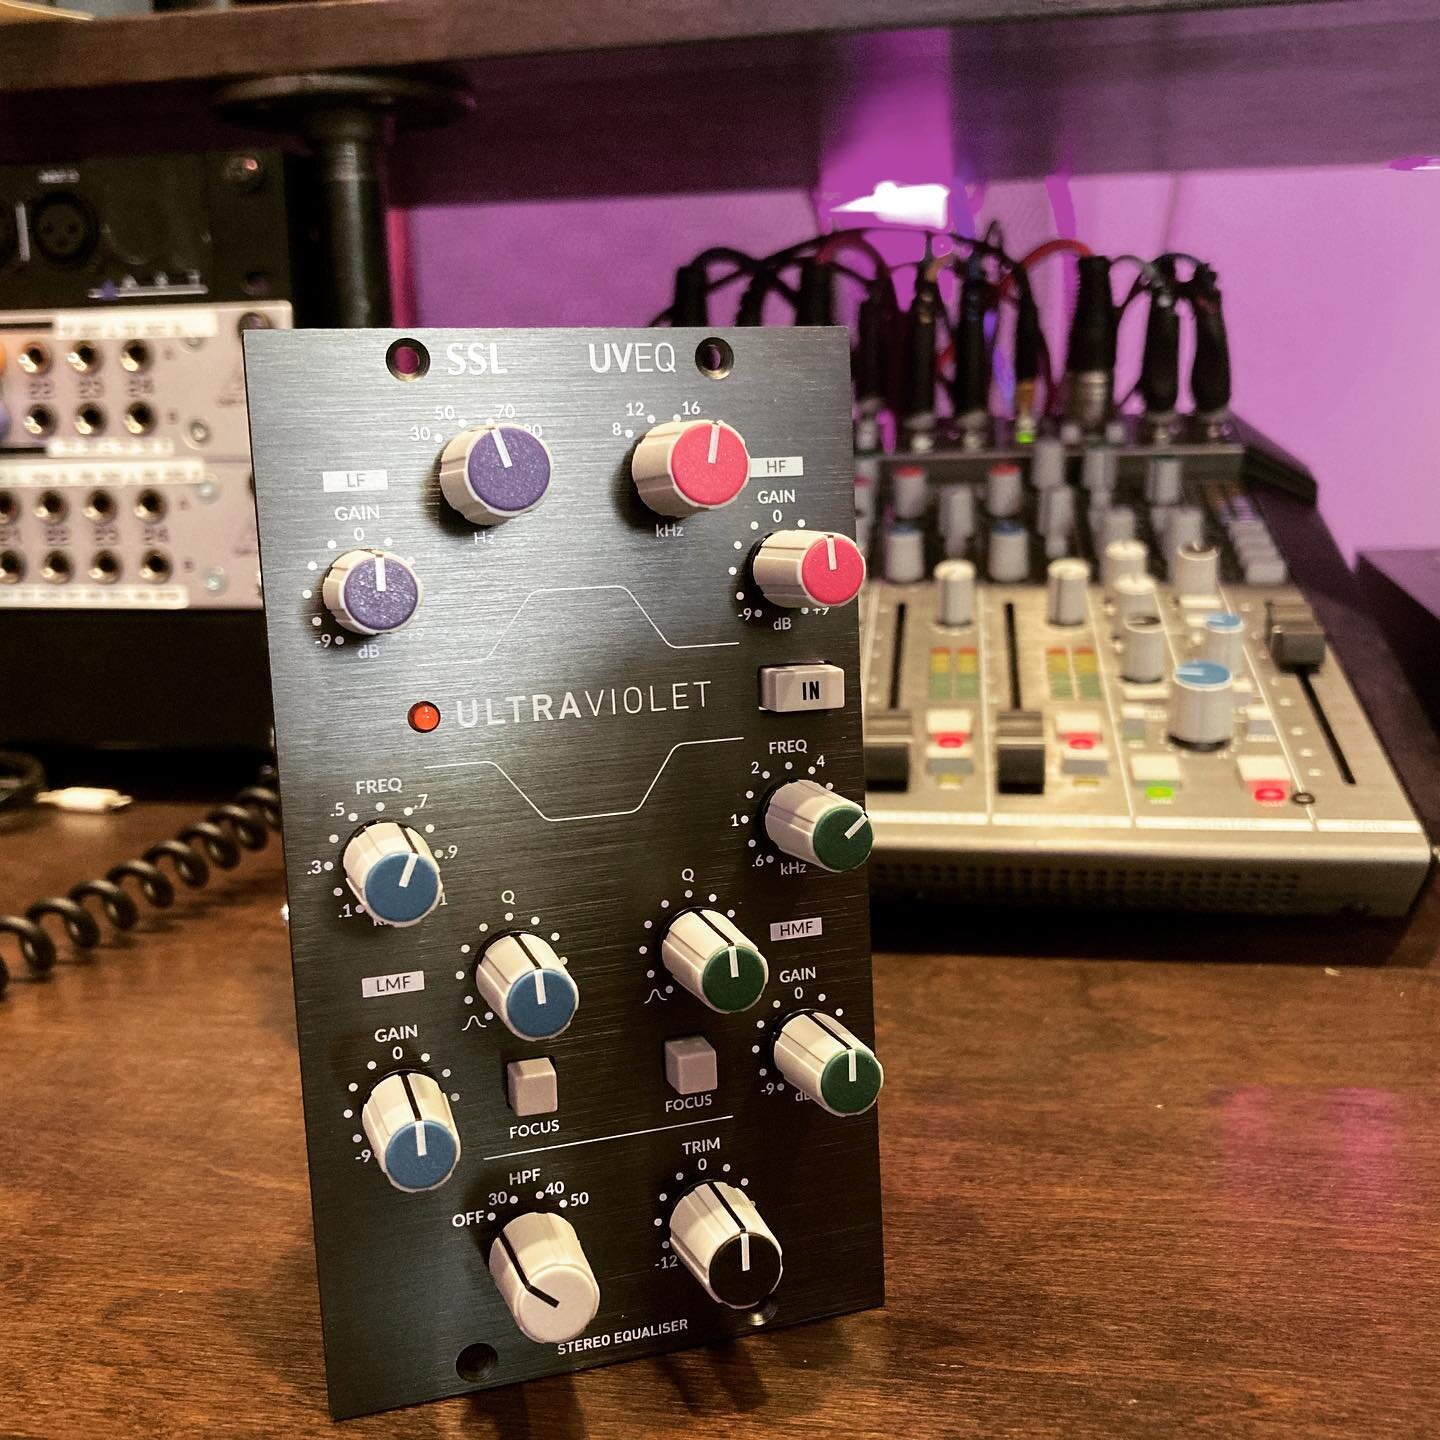 Really happy to add the SSL ultraviolet mastering EQ to studio